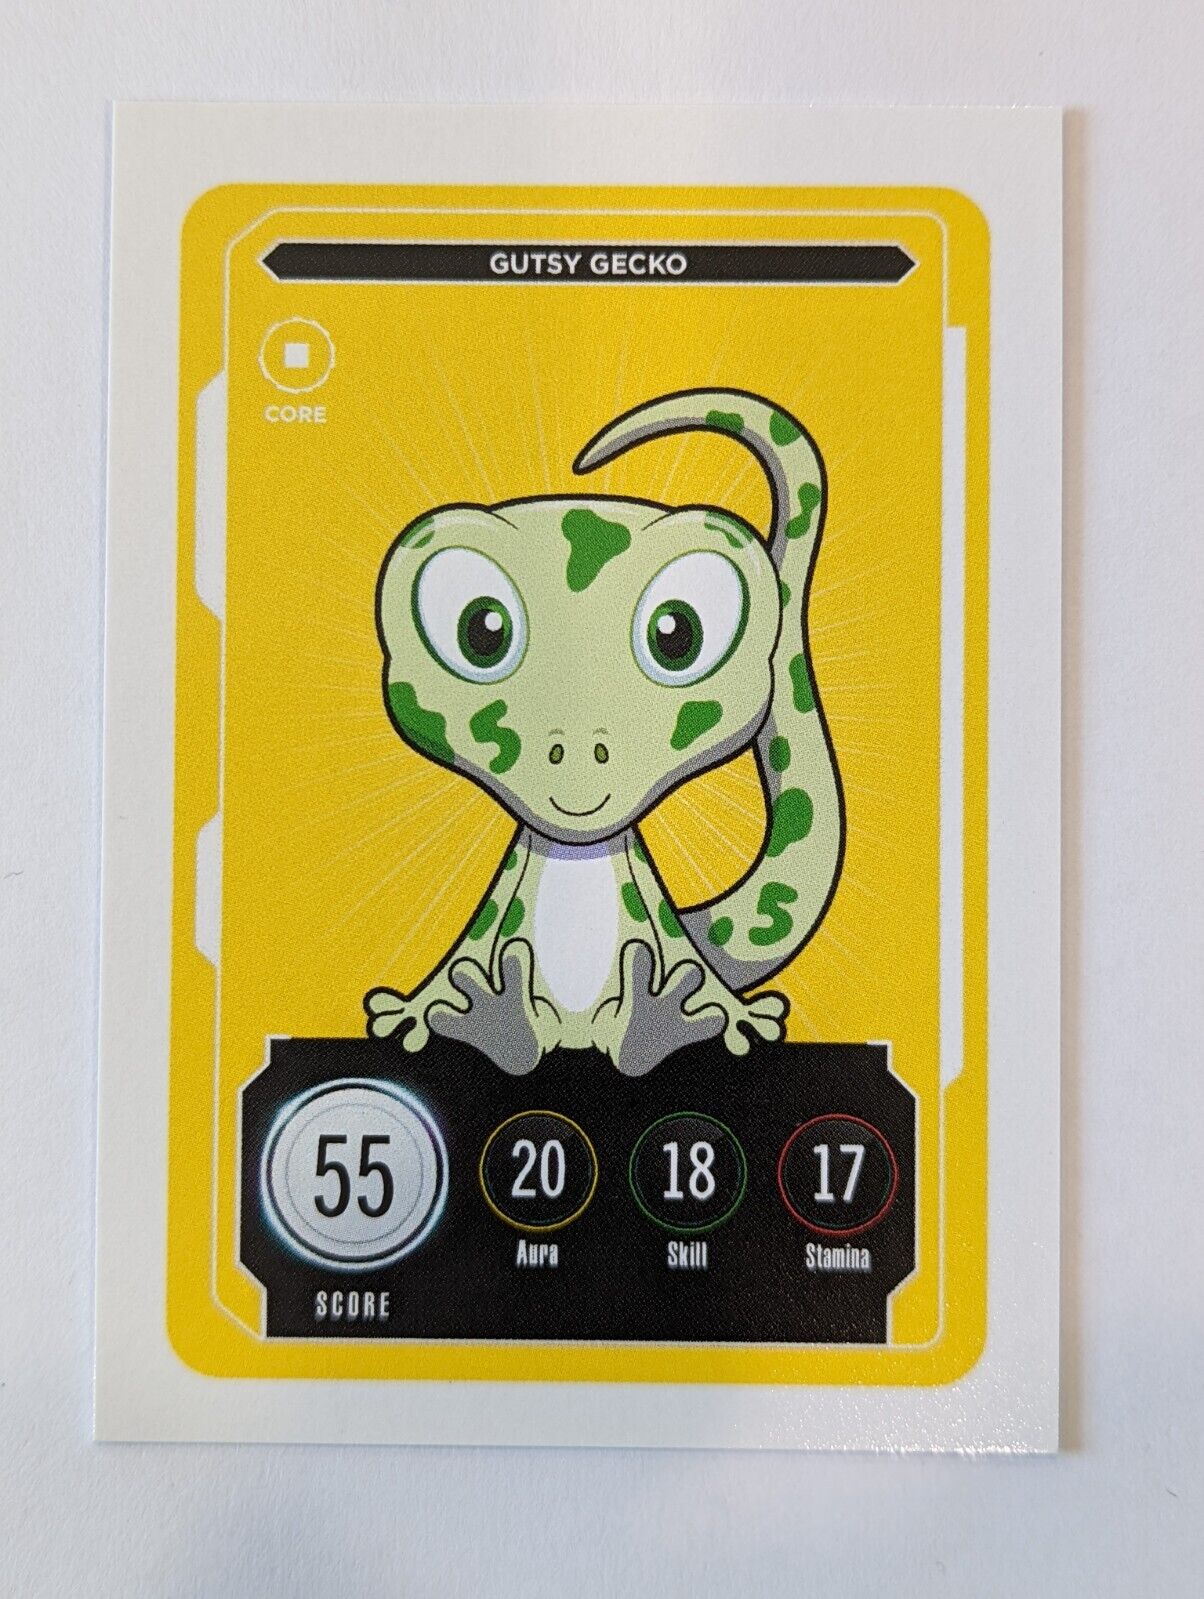 GUTSY GECKO VeeFriends Compete And Collect Card Core Series 2 ZeroCool Gary Vee